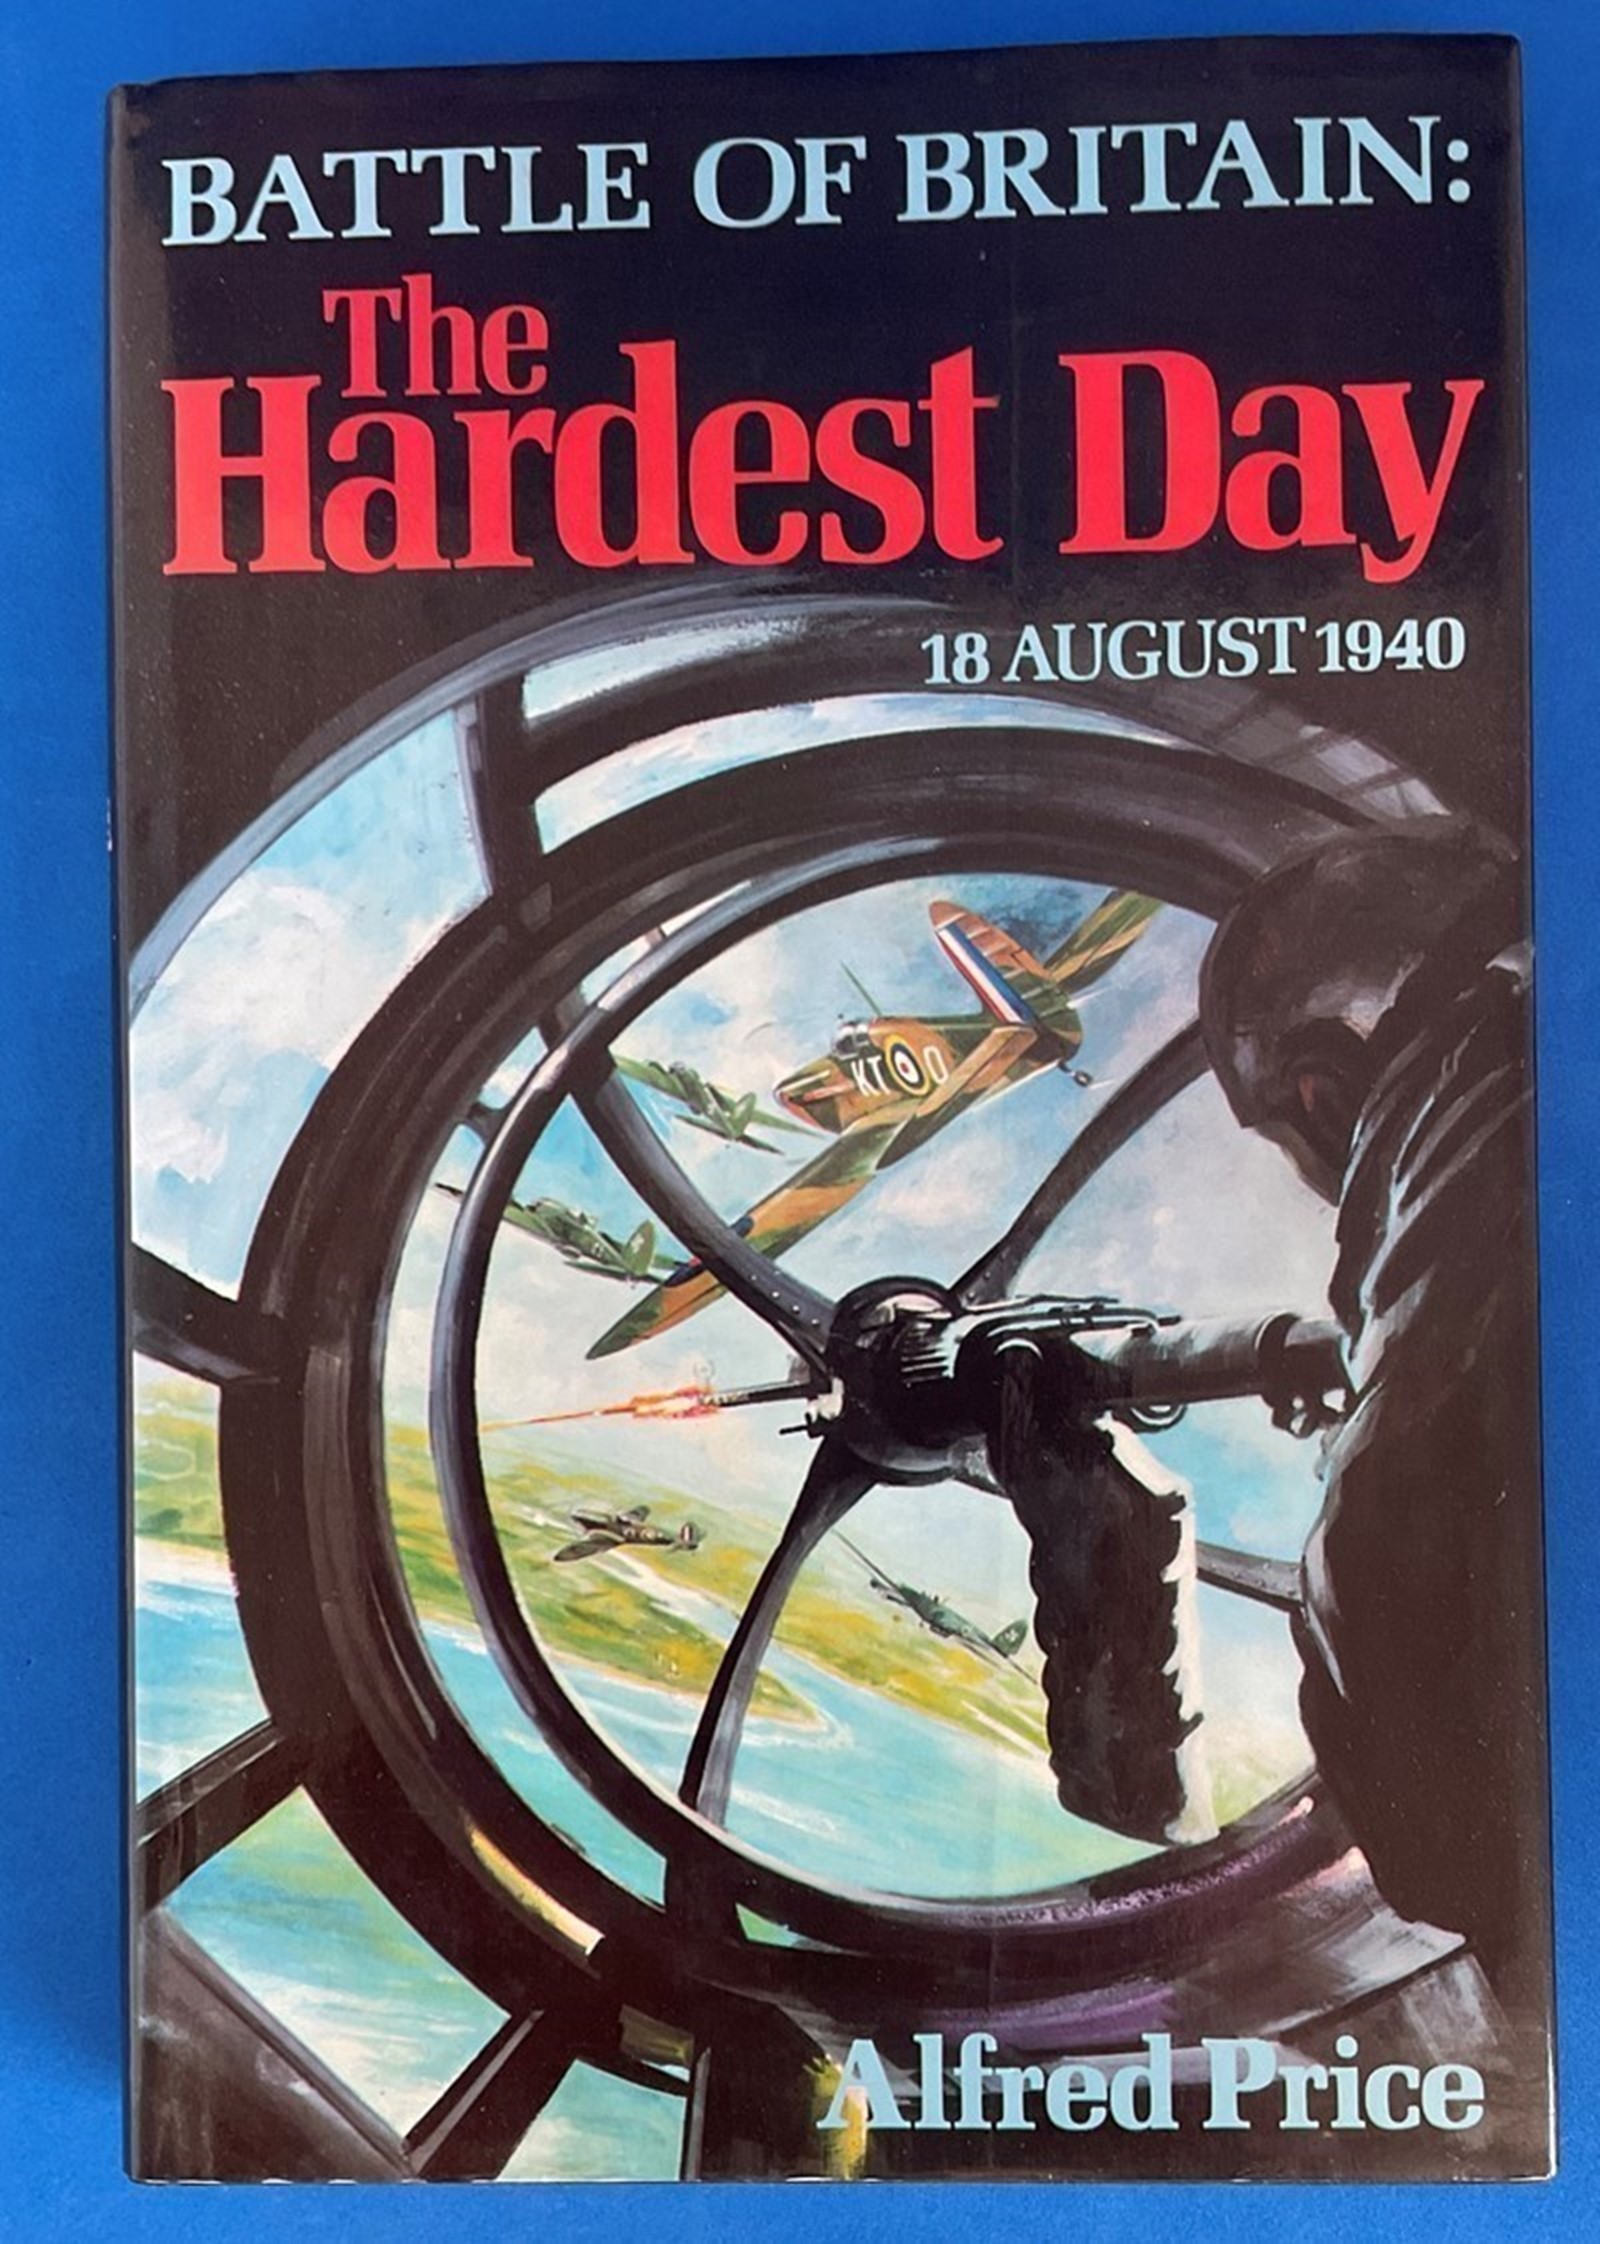 Alfred Price signed The Hardest Day hardback book about Battle of Britain - Image 3 of 3